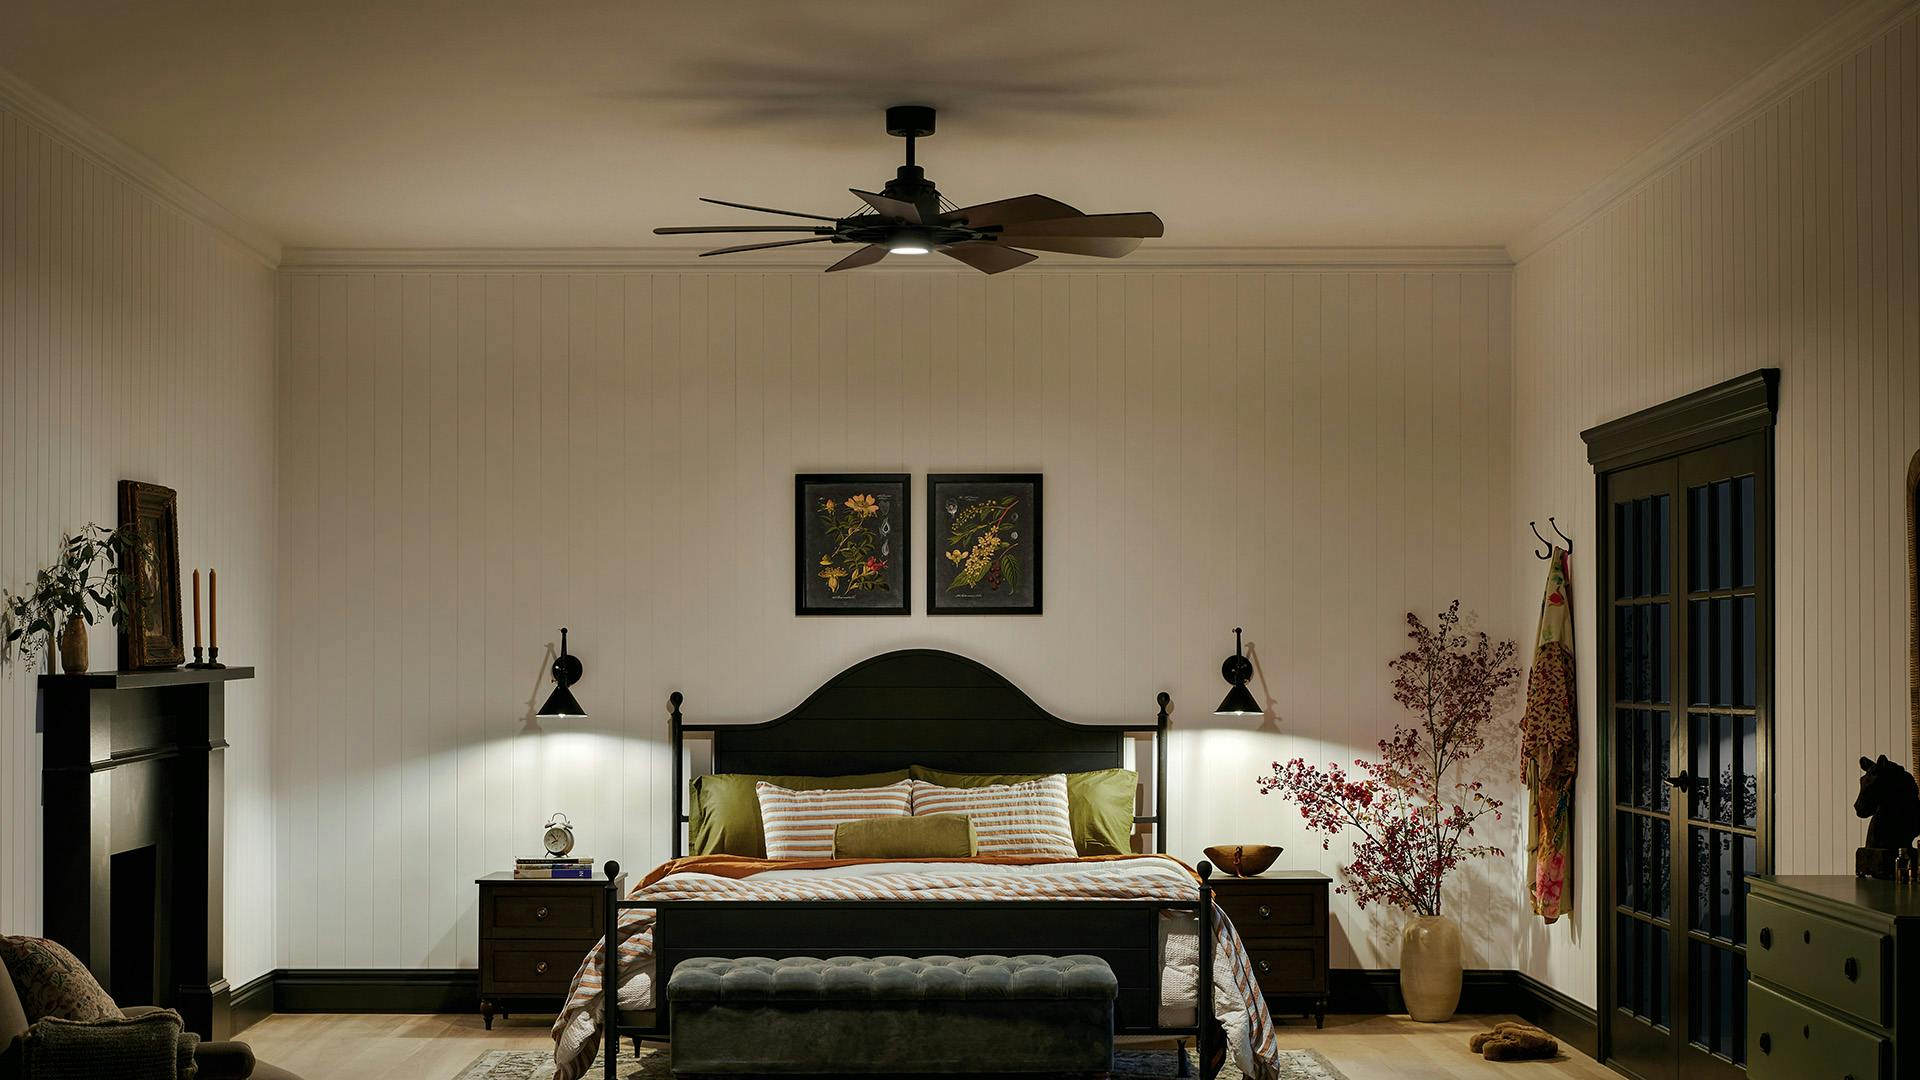 Bedroom at night with Gentry fan and Ellerbeck night stand sconces 